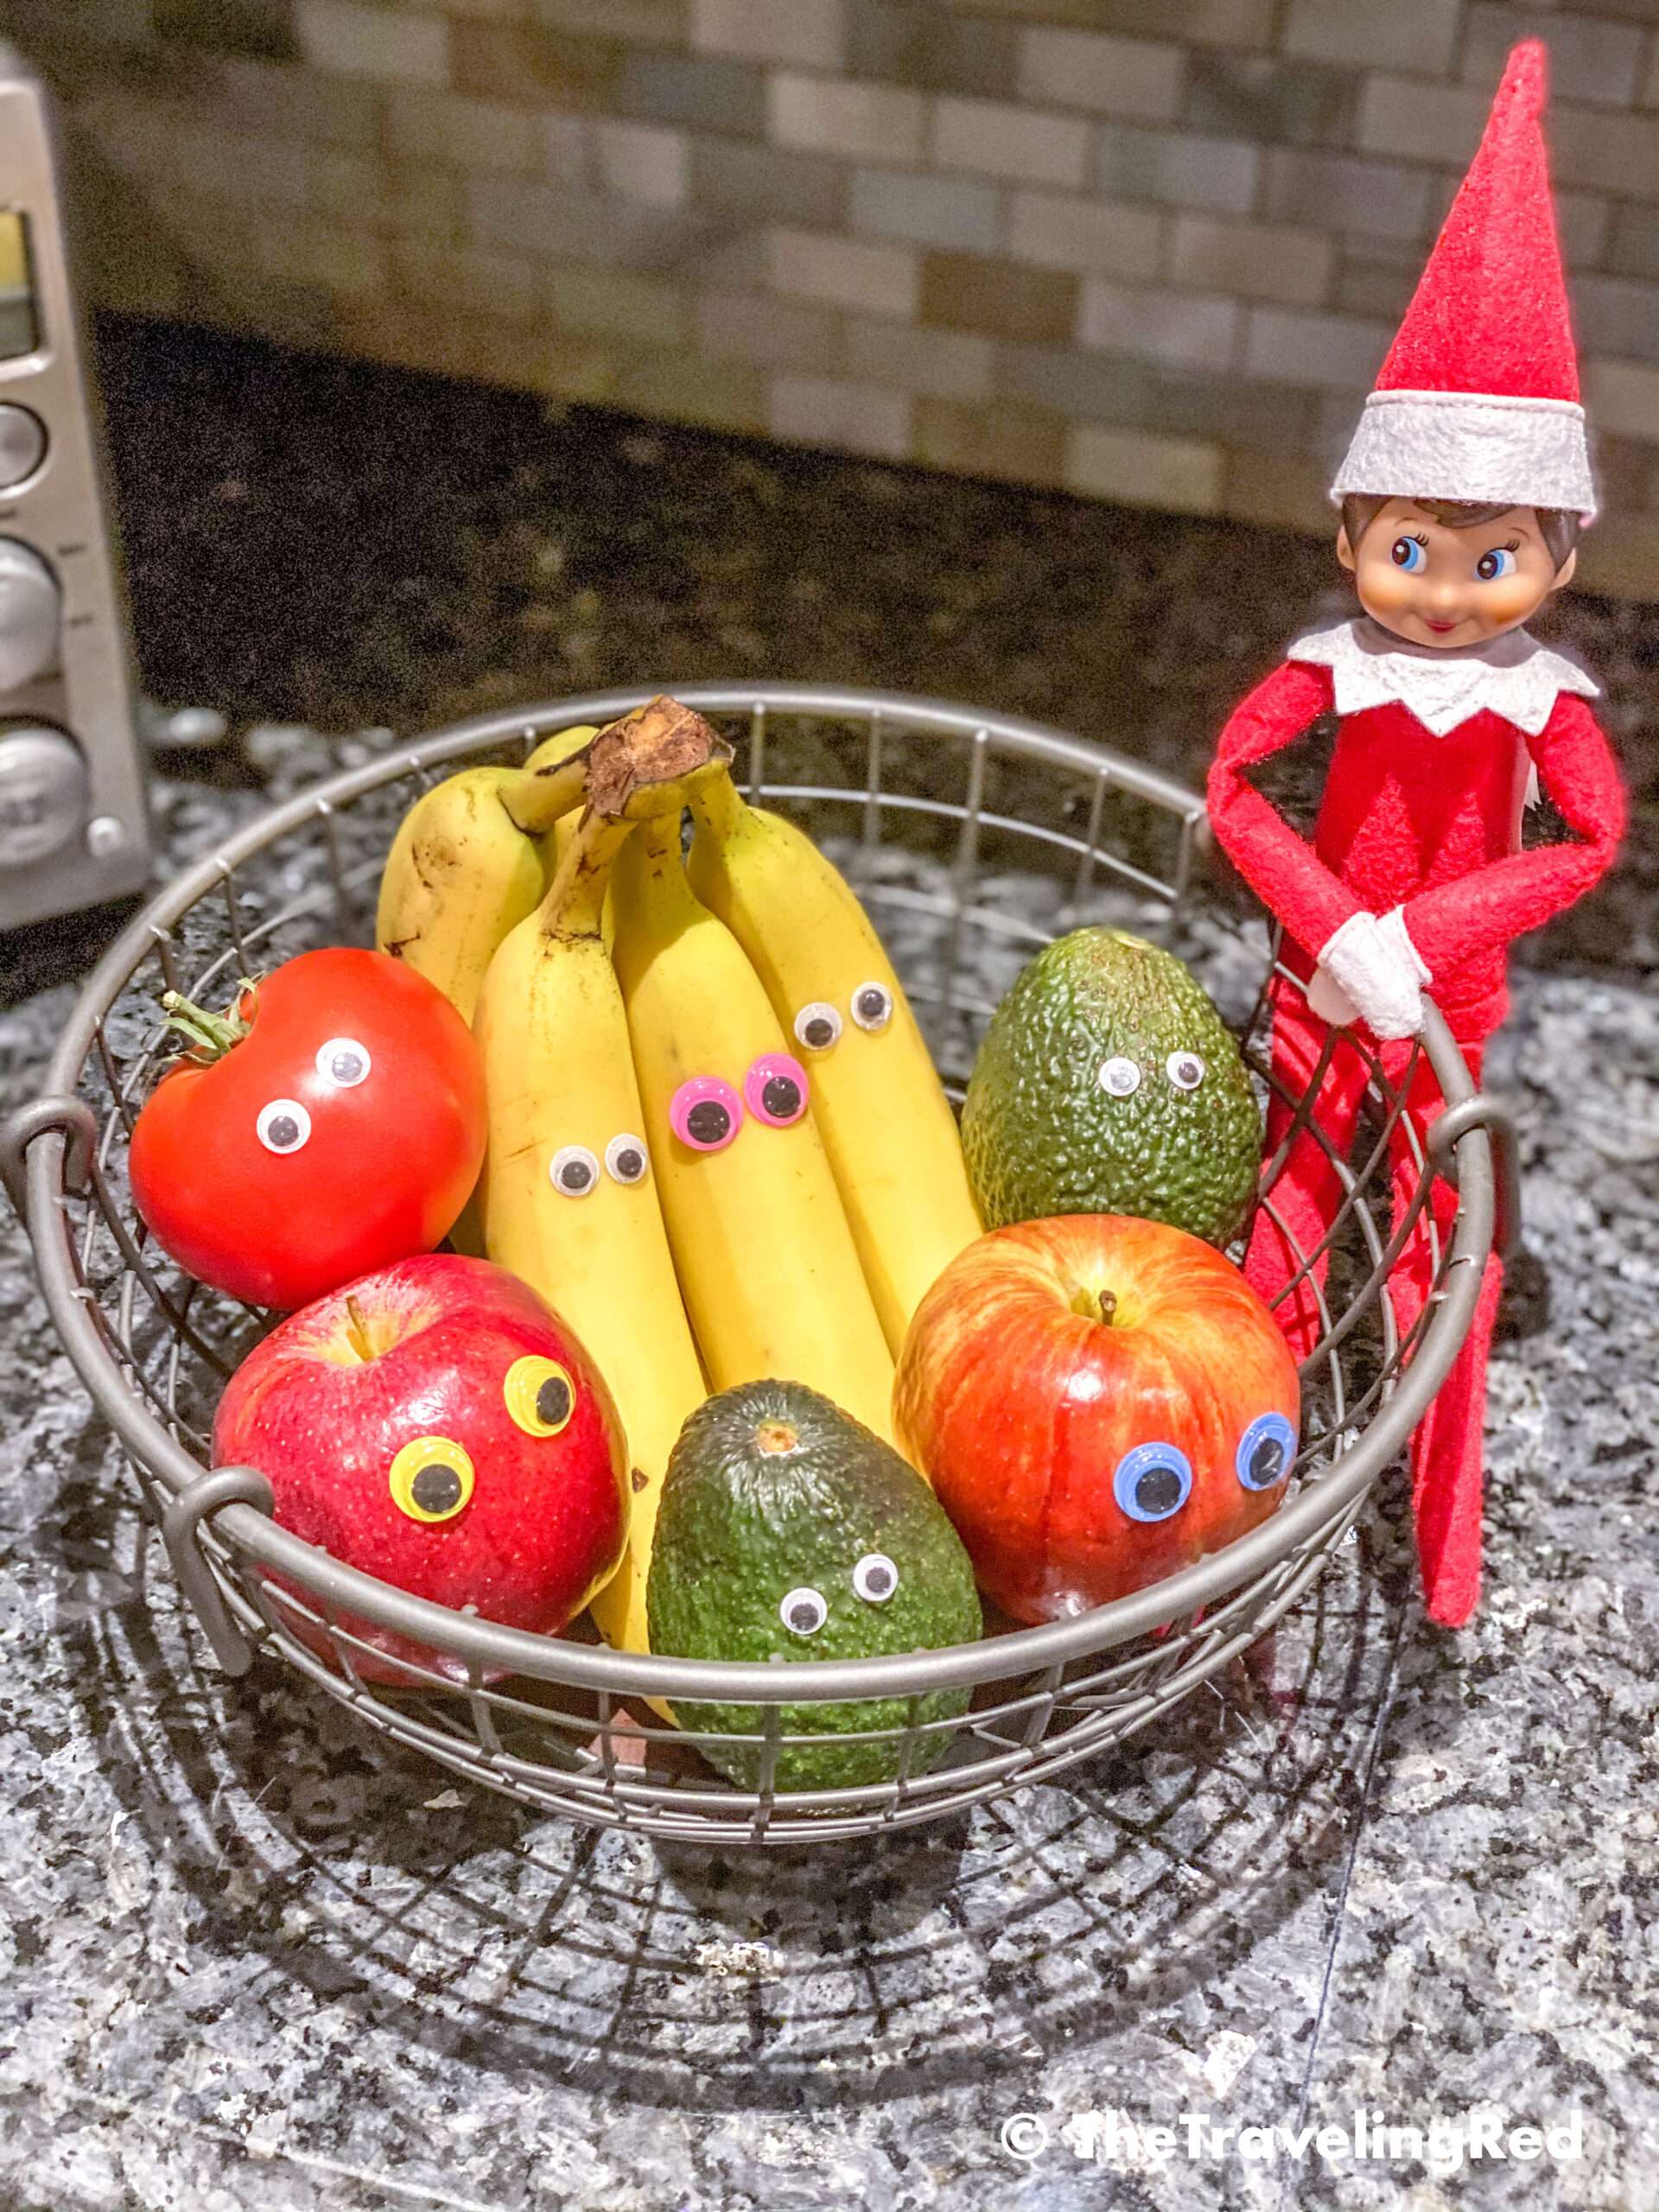 Naughty Elf on the shelf put googly eyes on all of our fruit in the fruit basket. Fun and easy elf on the shelf ideas for a naughty elf that are quick and easy using things you have at home.